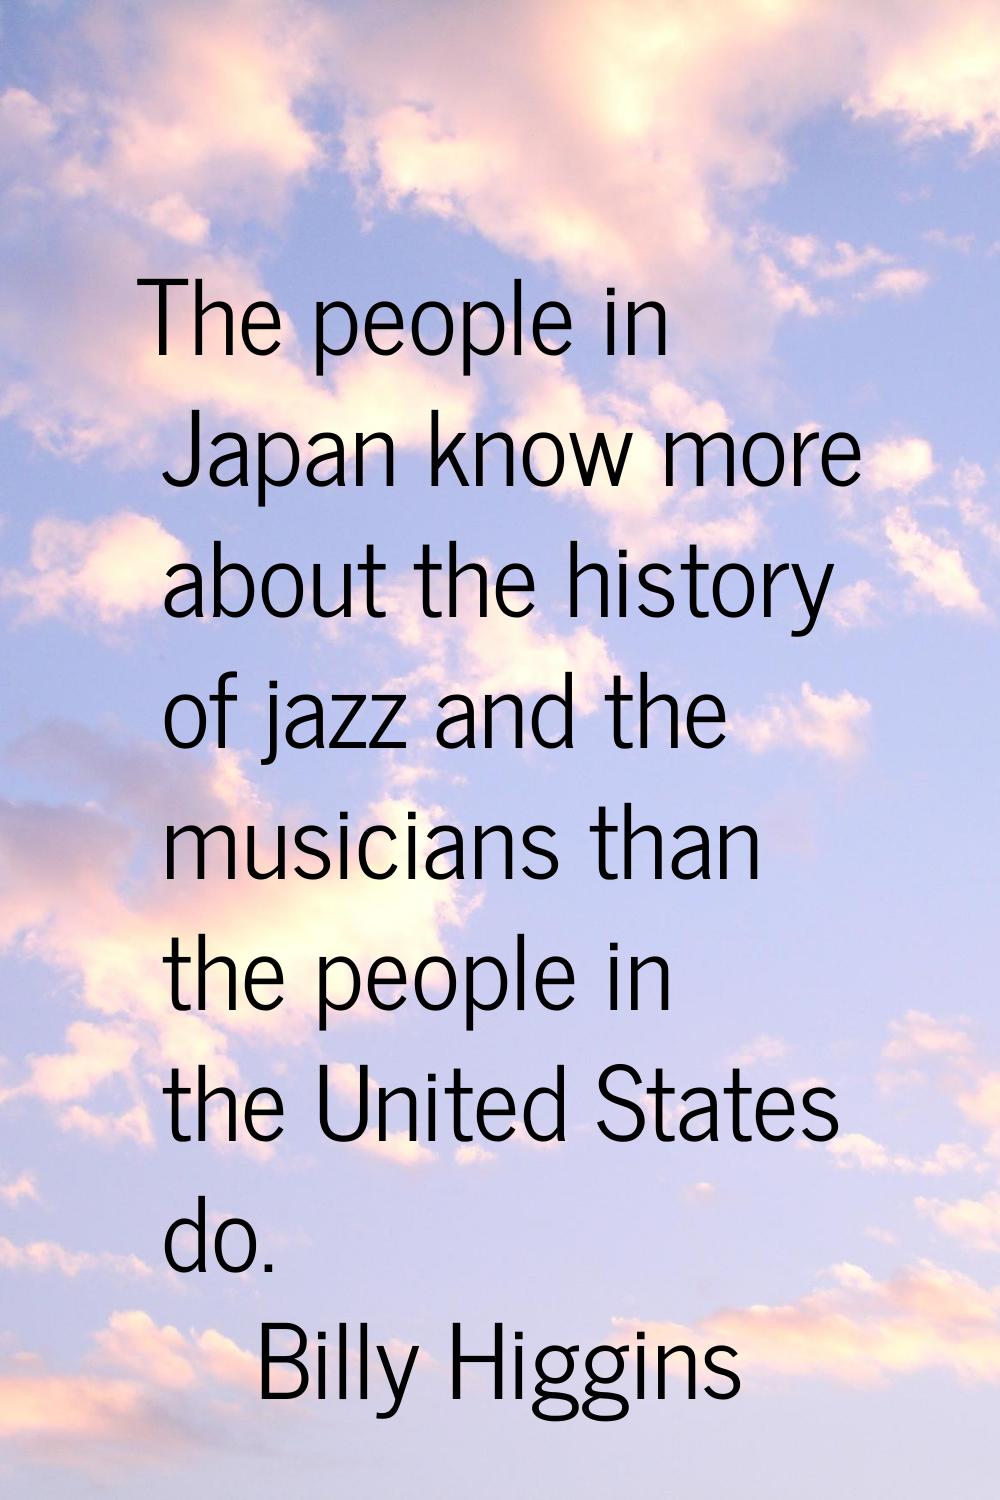 The people in Japan know more about the history of jazz and the musicians than the people in the Un